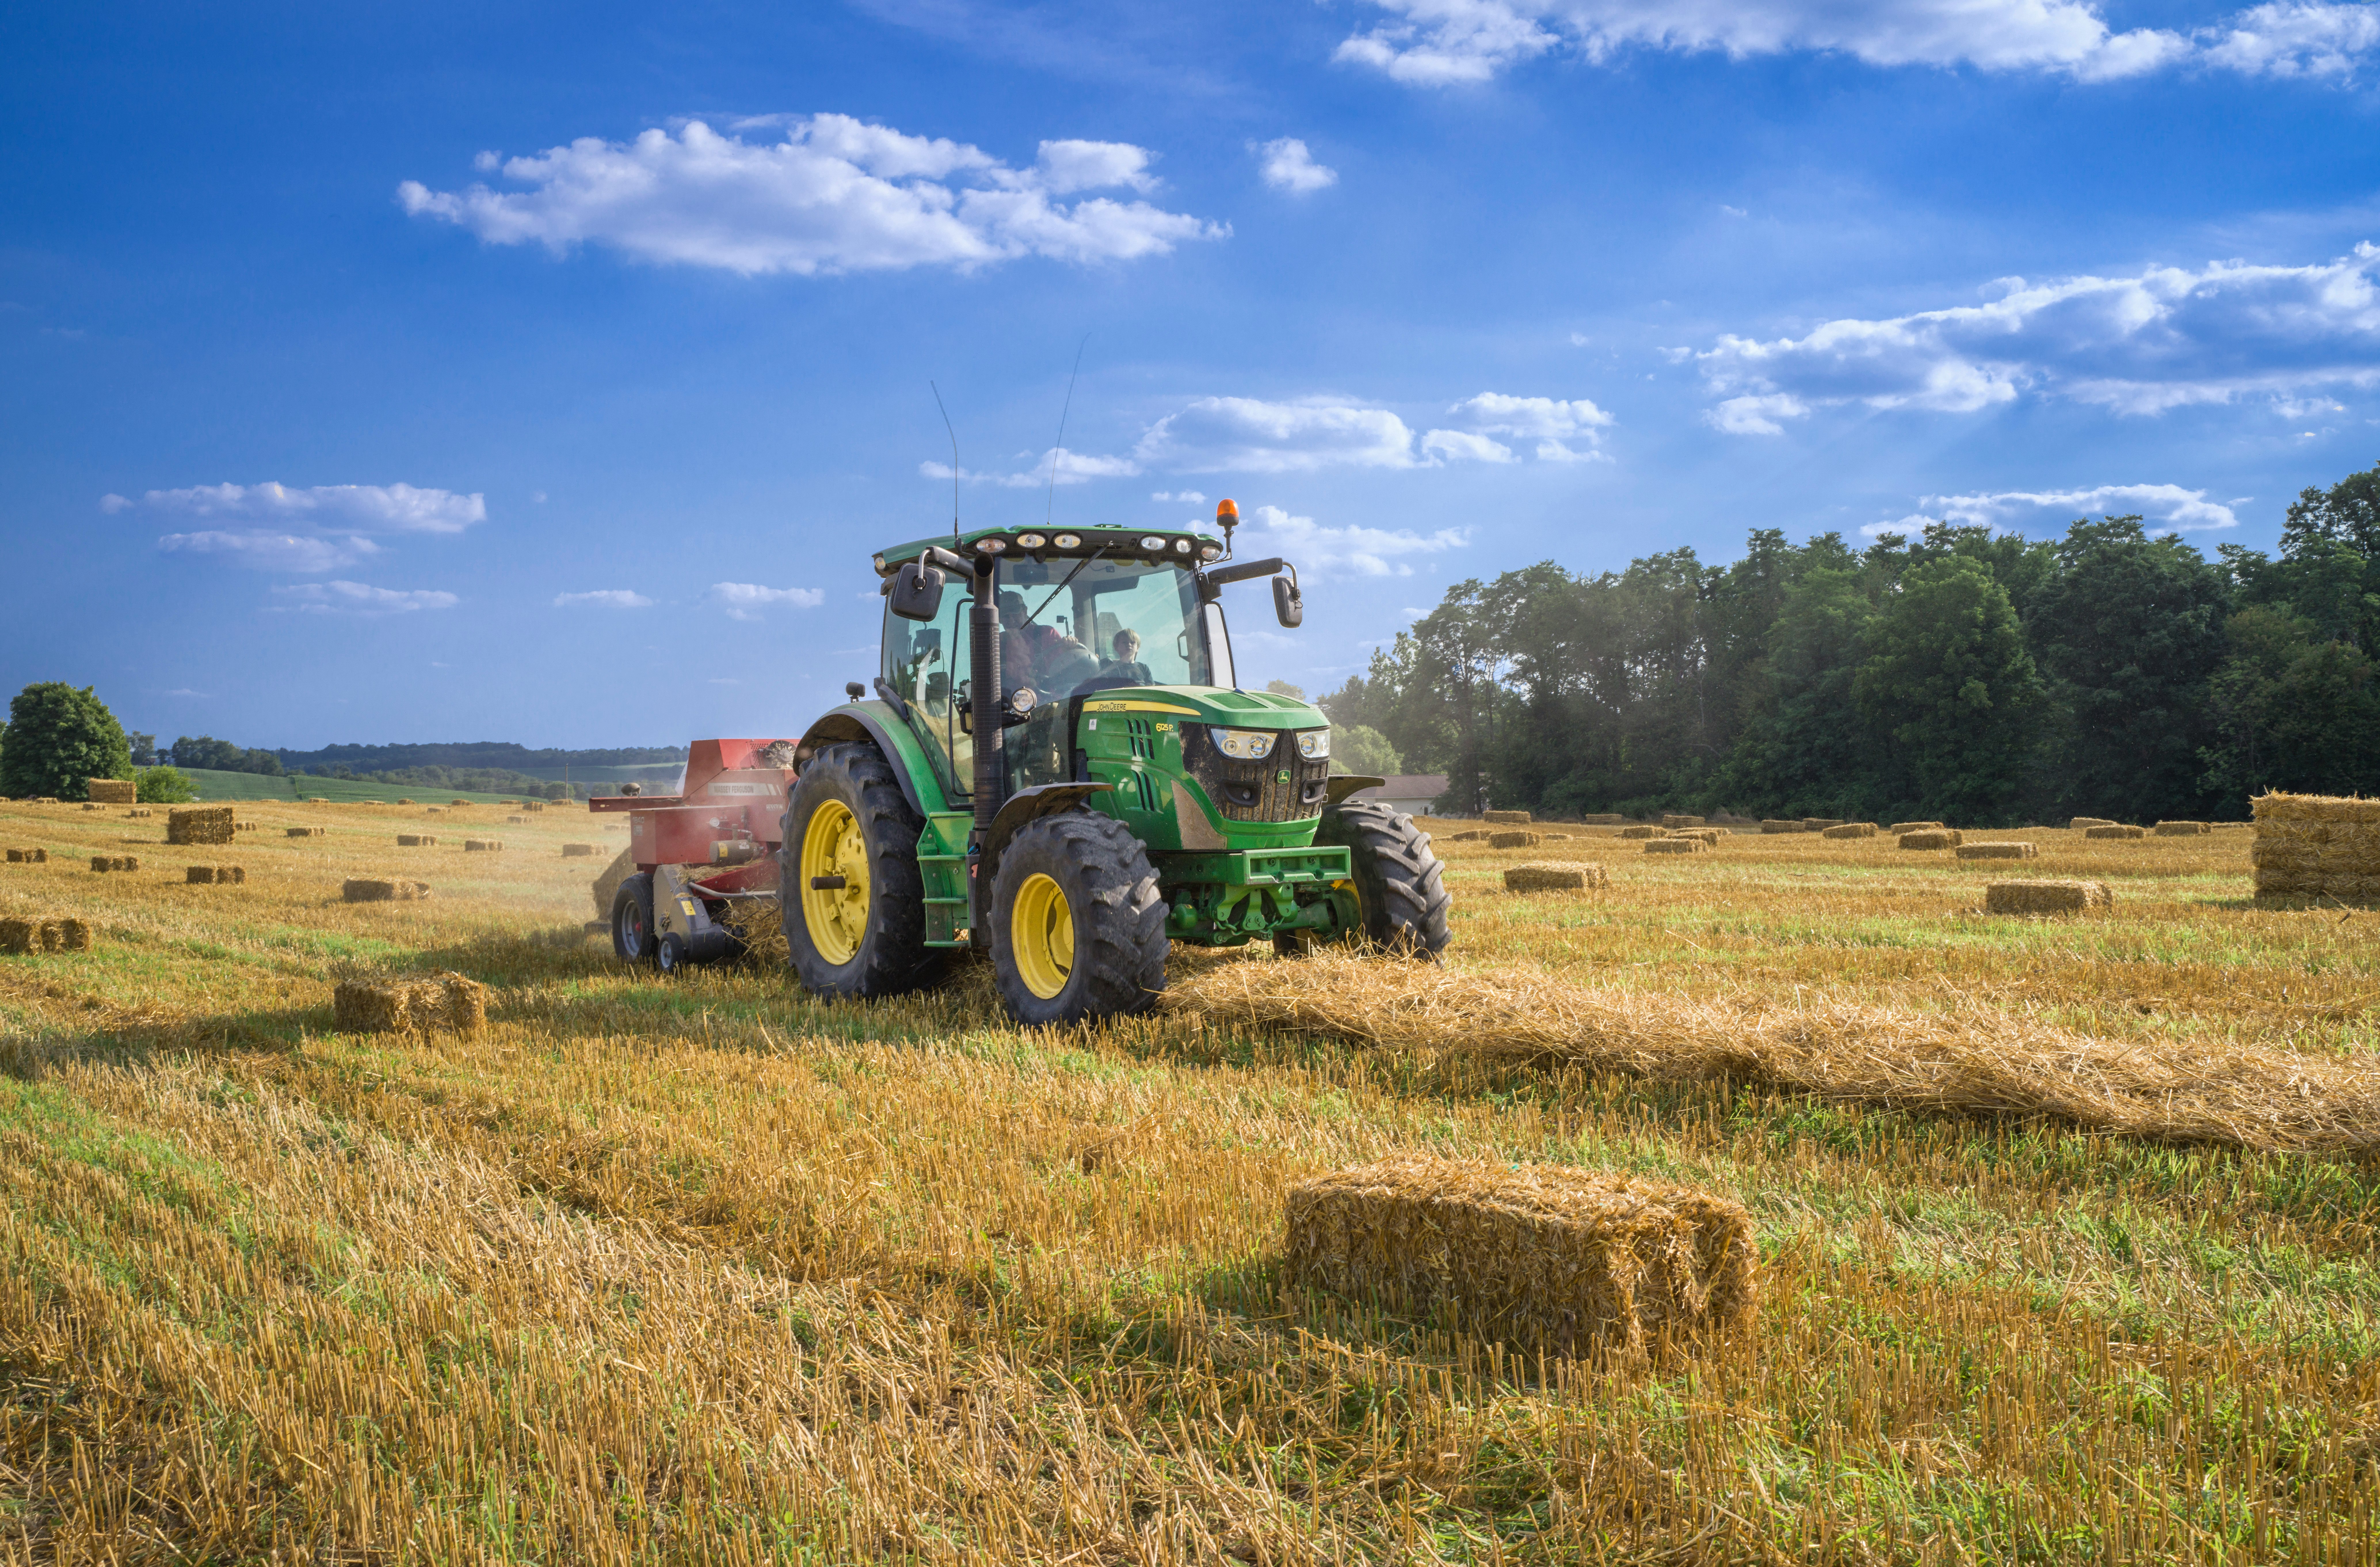 Farm Equipment is Vulnerable to Attack